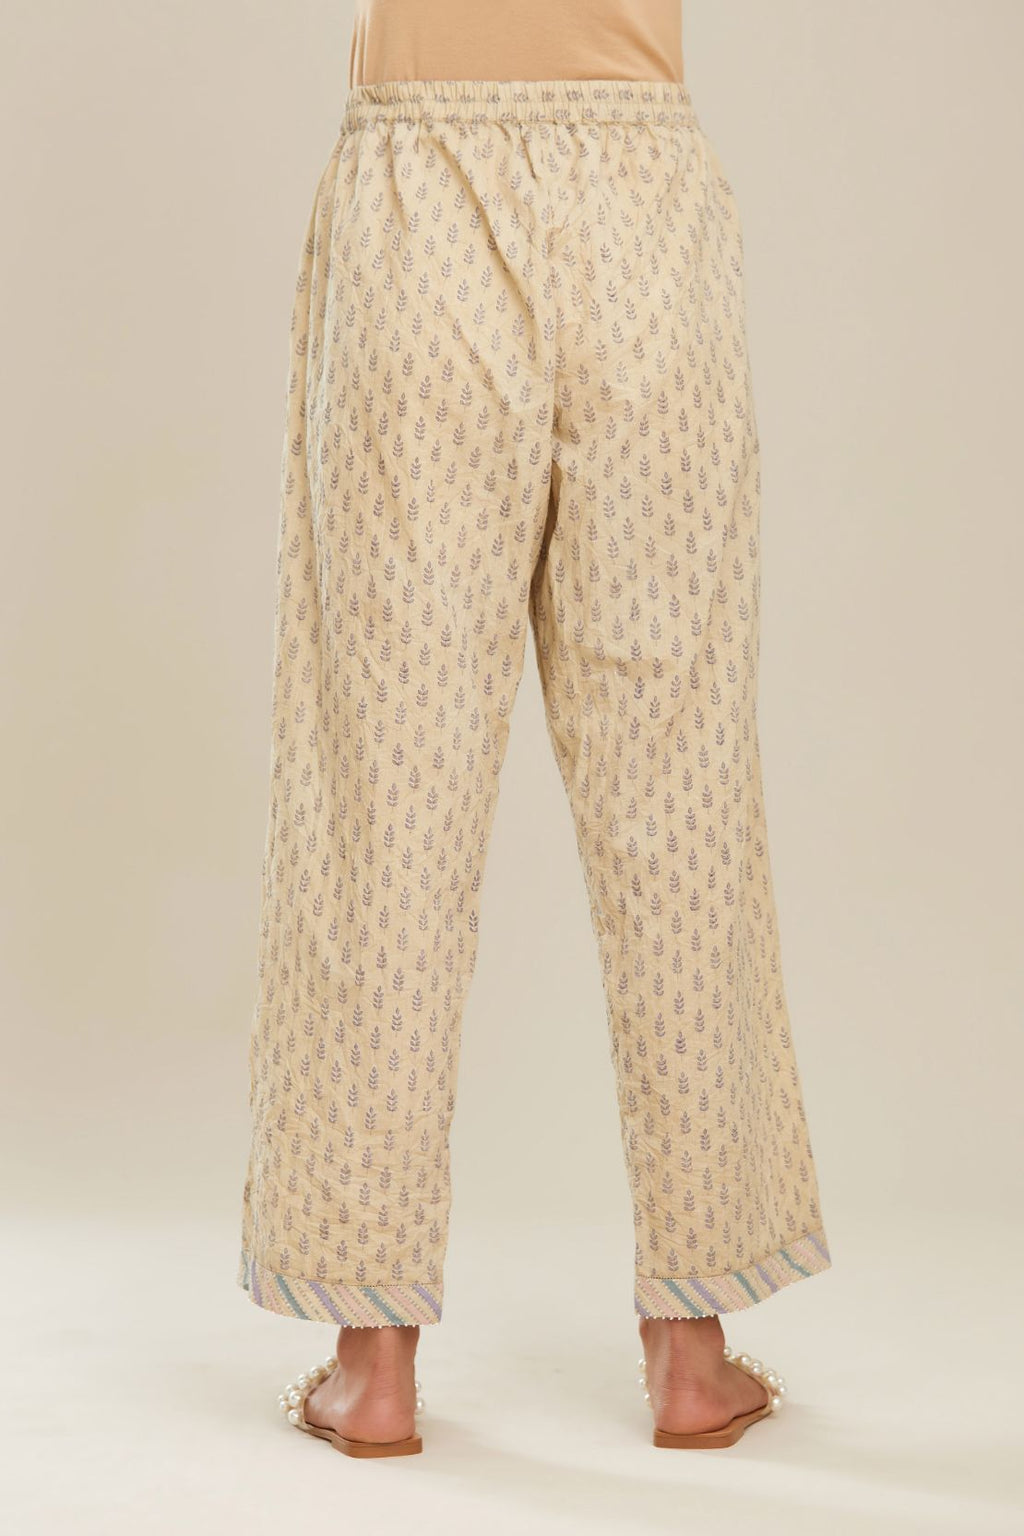 Beige hand block printed straight pants with striped fabric attached at bottom with faggoting and highlighted with hand attached beads. (PANTS)